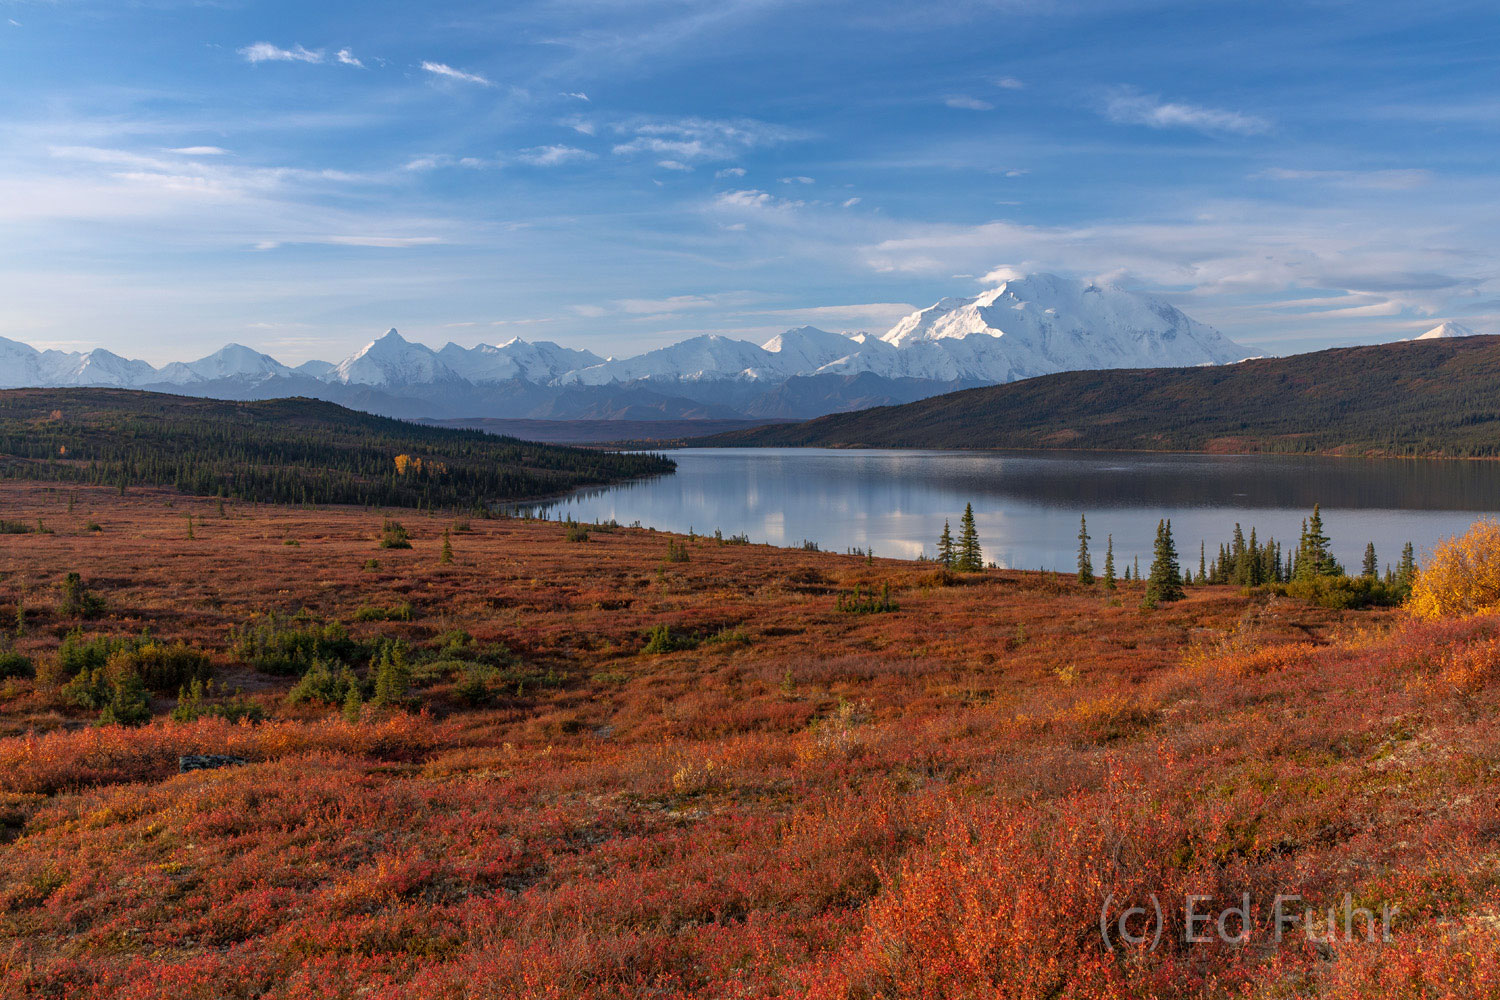 Miles of blueberry bushes carpet the shores of Wonder Lake as the Alaskan Range and Denali catch the morning sun.